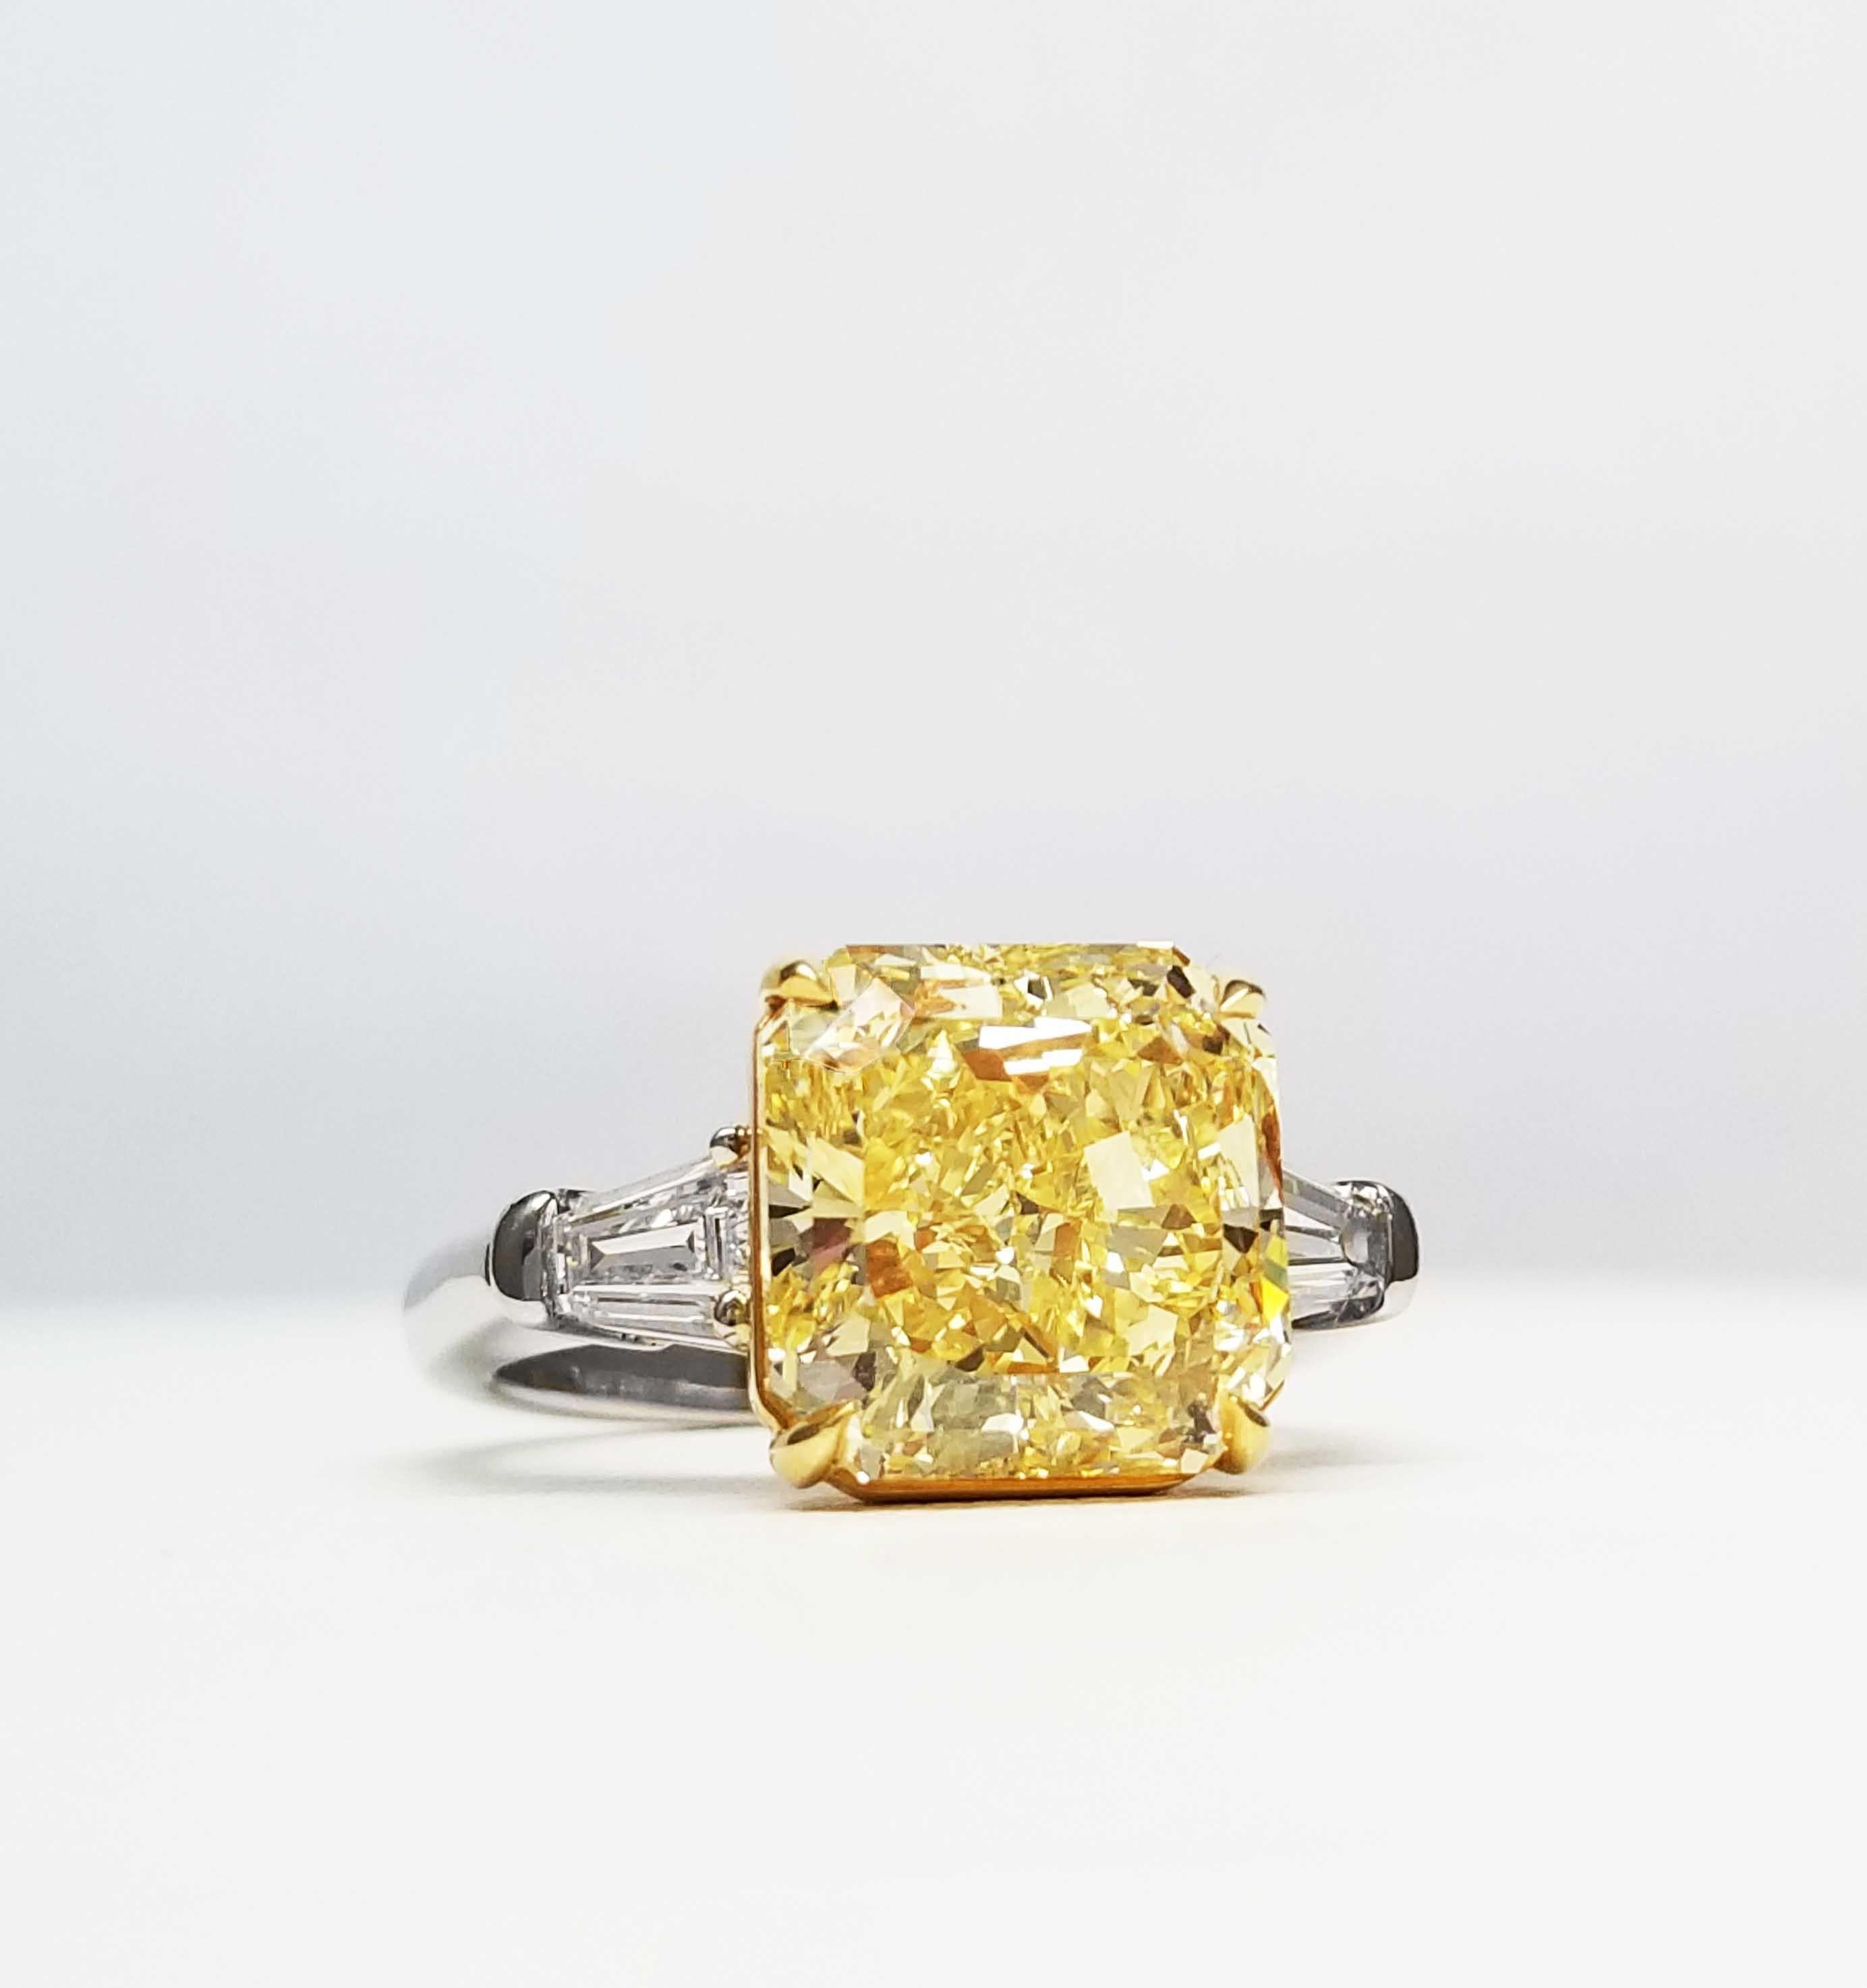 From SCARSELLI, this vibrant and spectacular 6.04-carat Fancy Intense Yellow Diamond (VS1 clarity) is flanked by a 0.40 carats total pair of white tapered baguette diamonds for classic appeal.  The mounting is hand made with yellow gold seat and